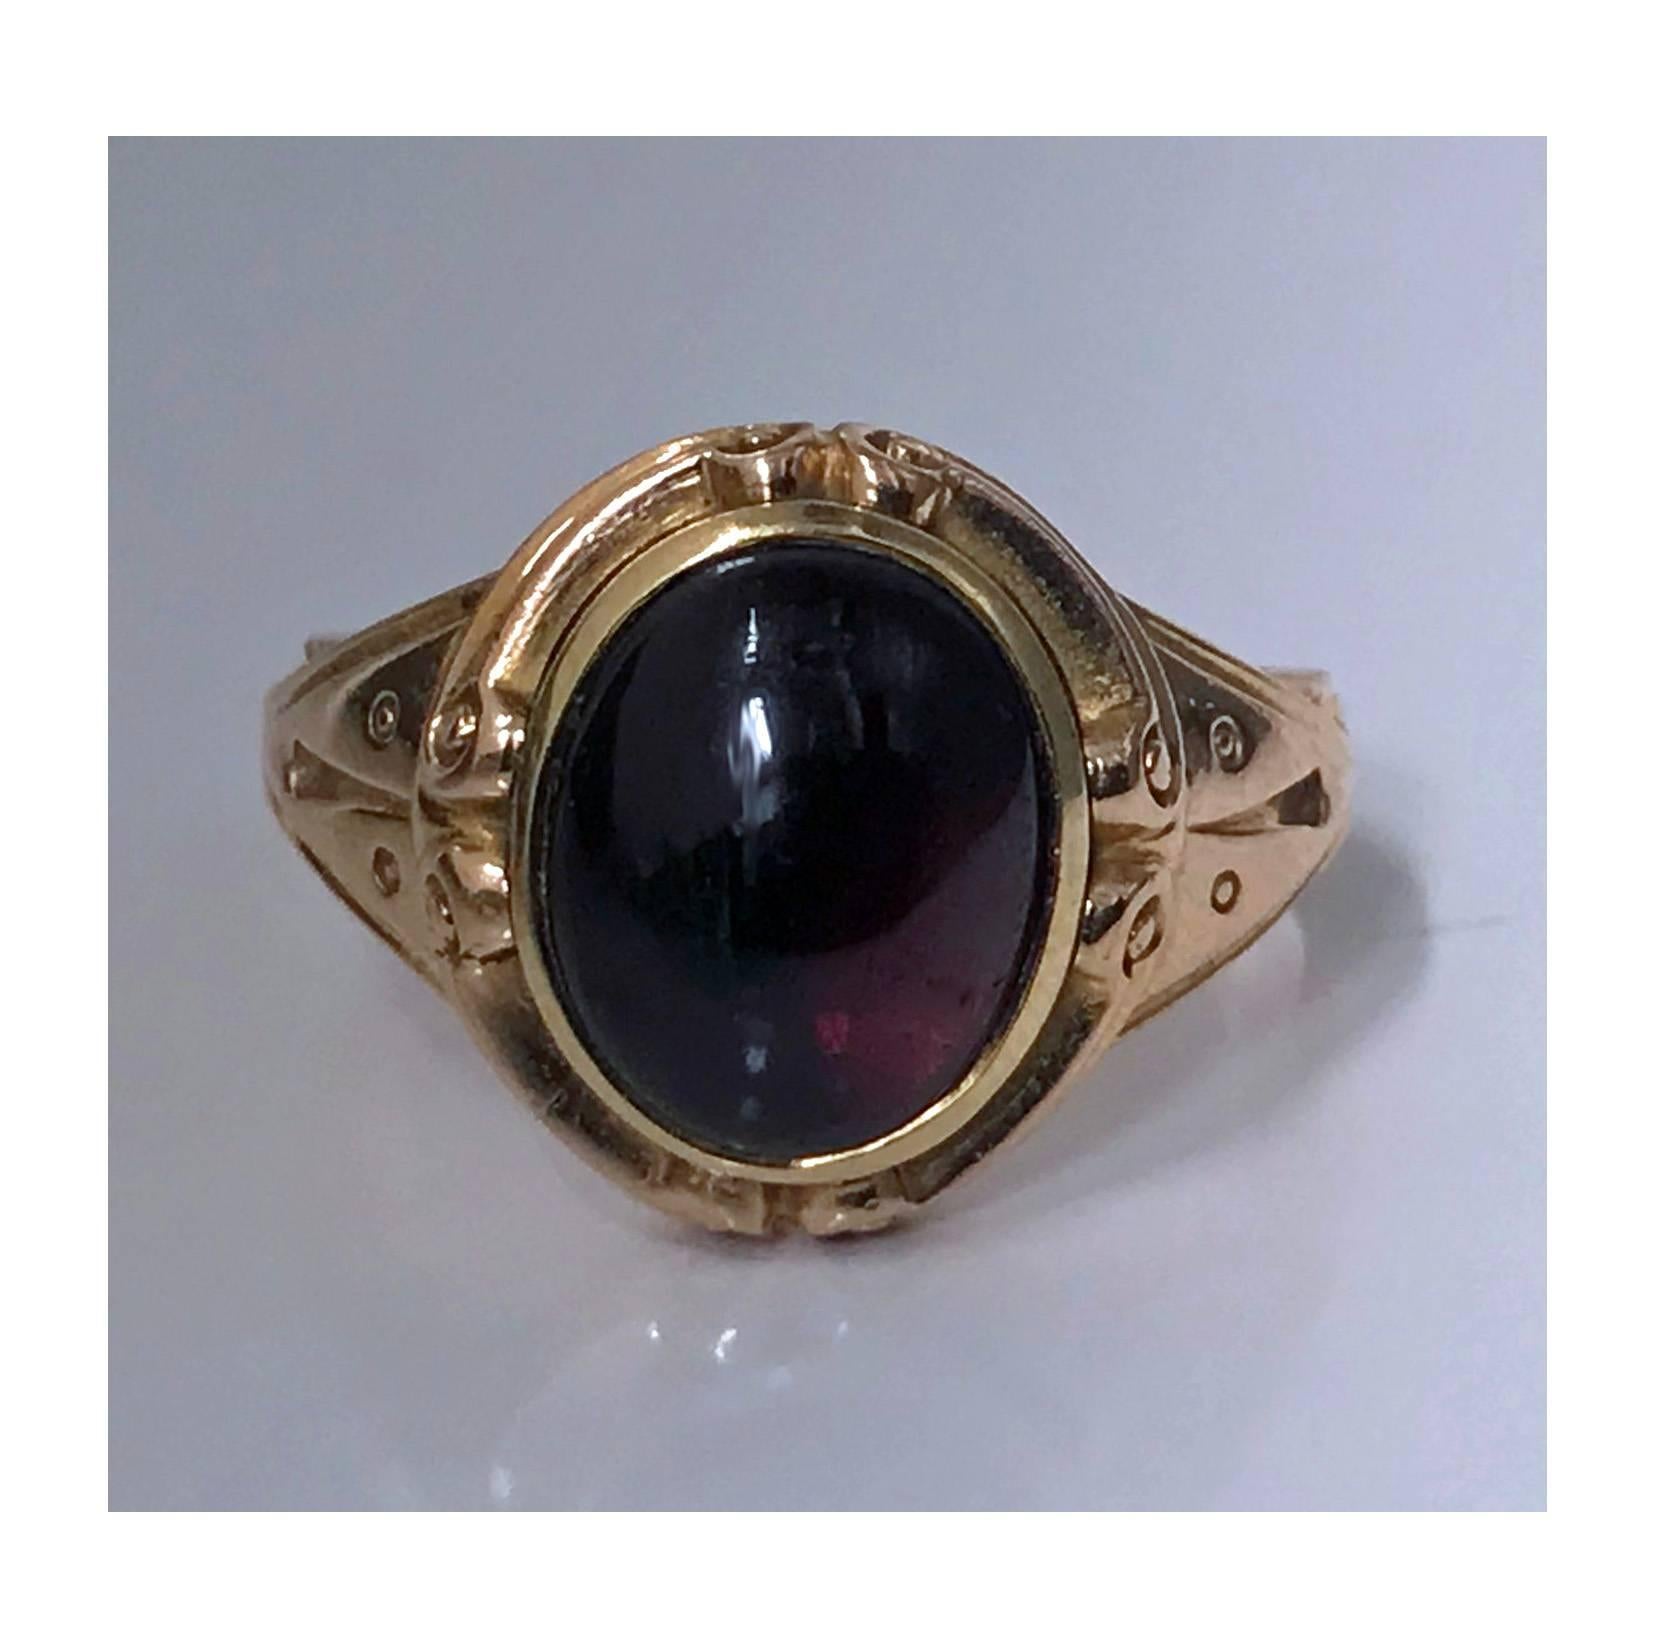 Fine Antique 19th century 14K rose gold ring with a deep red garnet cabochon or carbuncle, gauging 12.5 x 10.0 mm in a closed-back setting with carved surround mount and shoulders. Stamped 14K on interior of shank. Item Weight: 10.34 grams. Ring